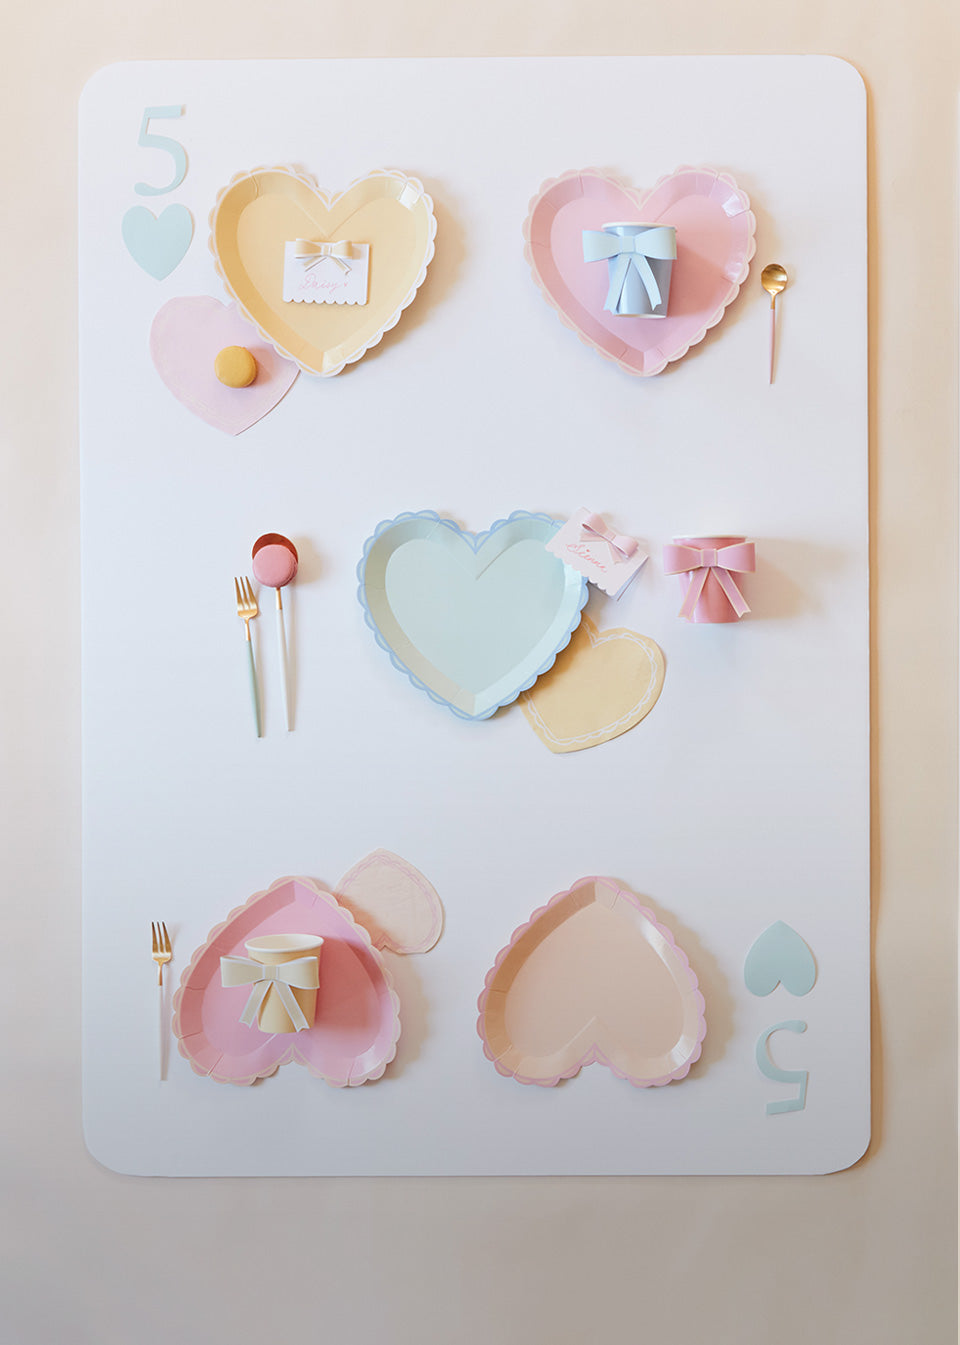 A card of the 5 of hearts is created out of pastel heart plates in colors of yellow, green, pink, and blue.